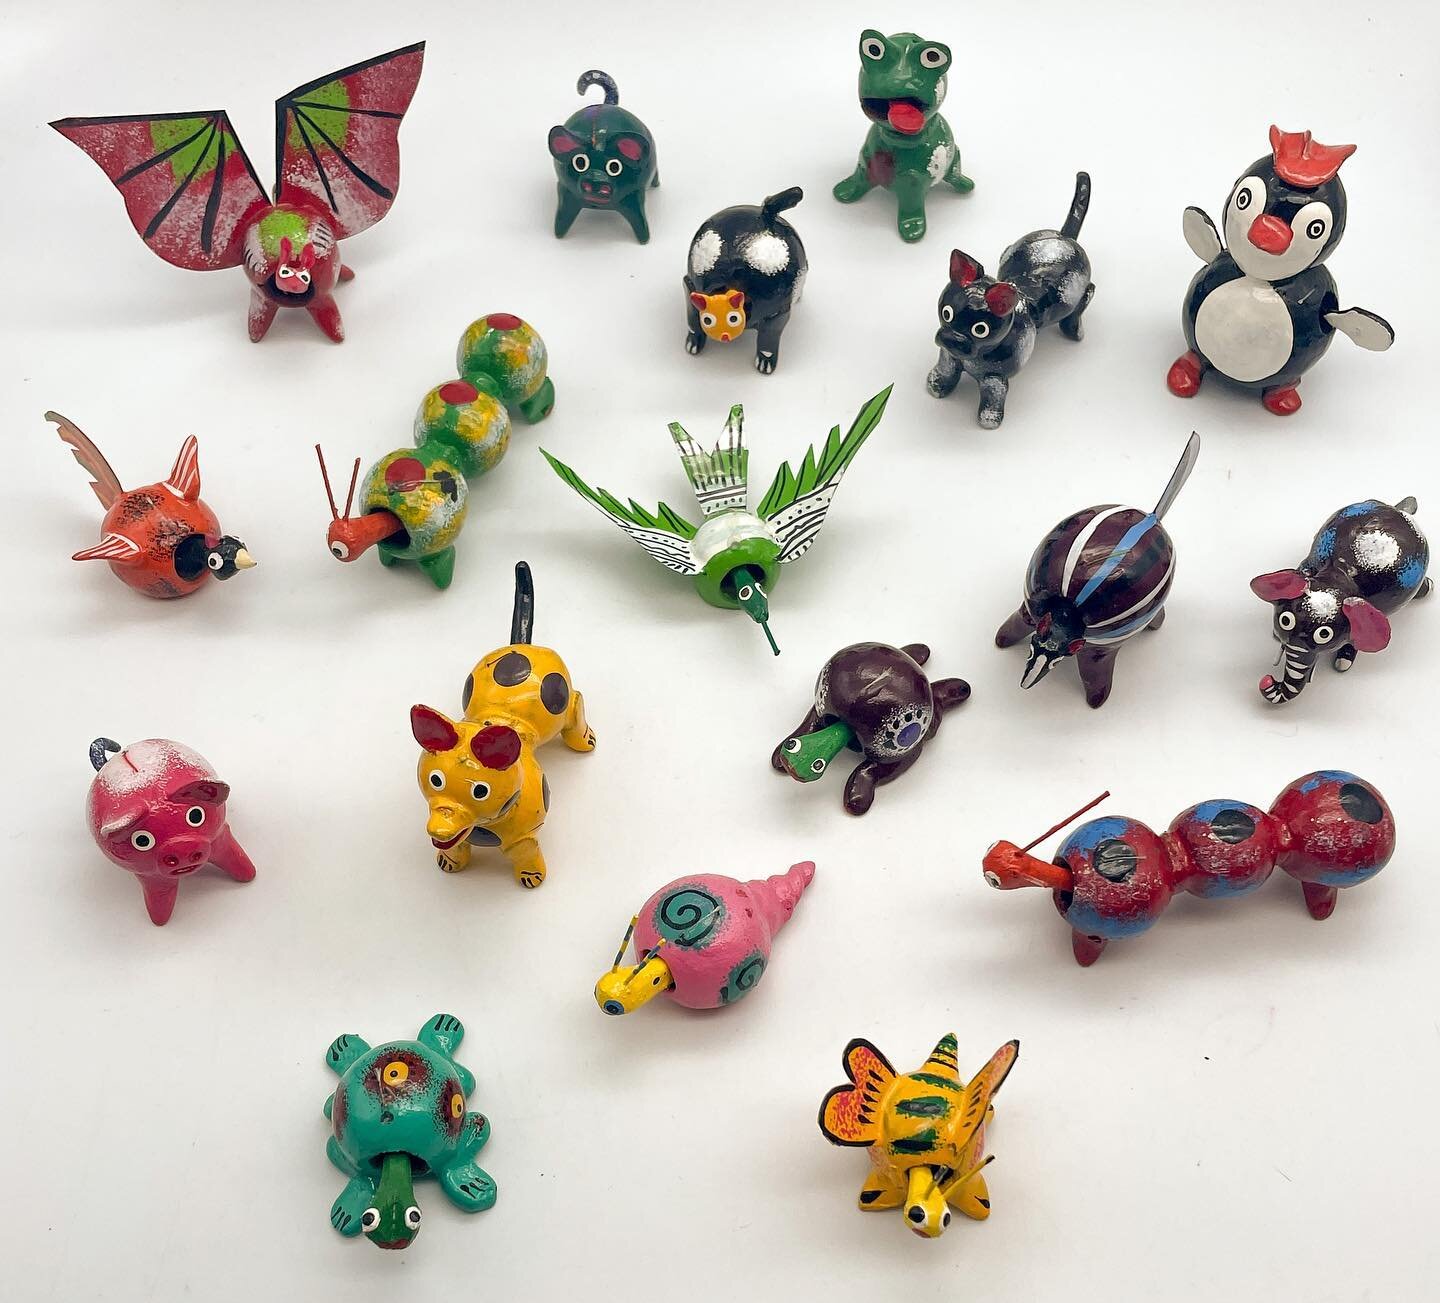 &ldquo;These fascinating and whimsical &ldquo;seismic critters&rdquo; are born in rural southern Mexico, in villages of the Middle American Indians, Nahua. As caterpillar becomes a butterfly, these little creatures began their lives as gourds, grown 